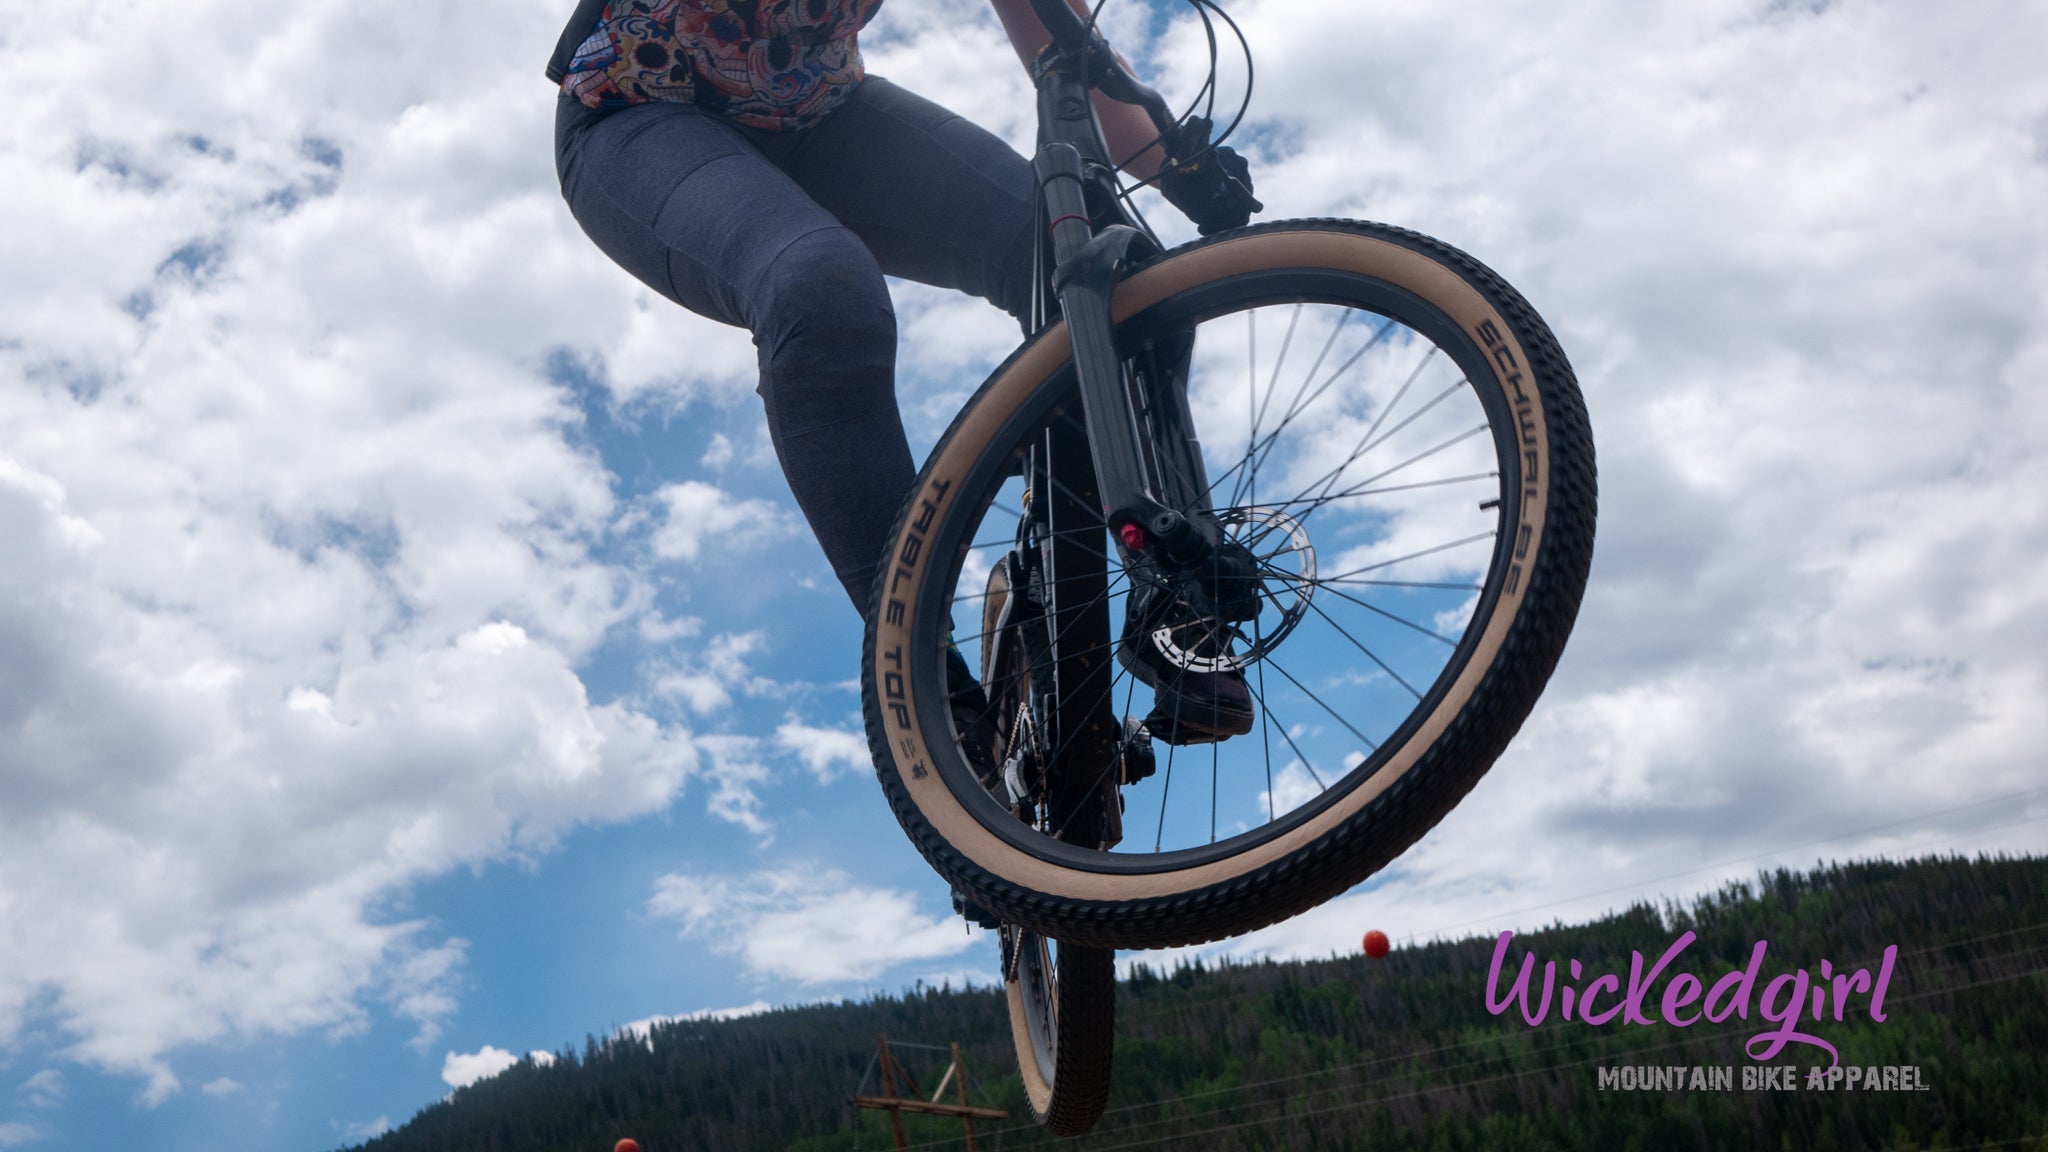 Women's cycling pants made for all types of riding styles.  Road rides, gravel and sending it on the bike these pants do it all.